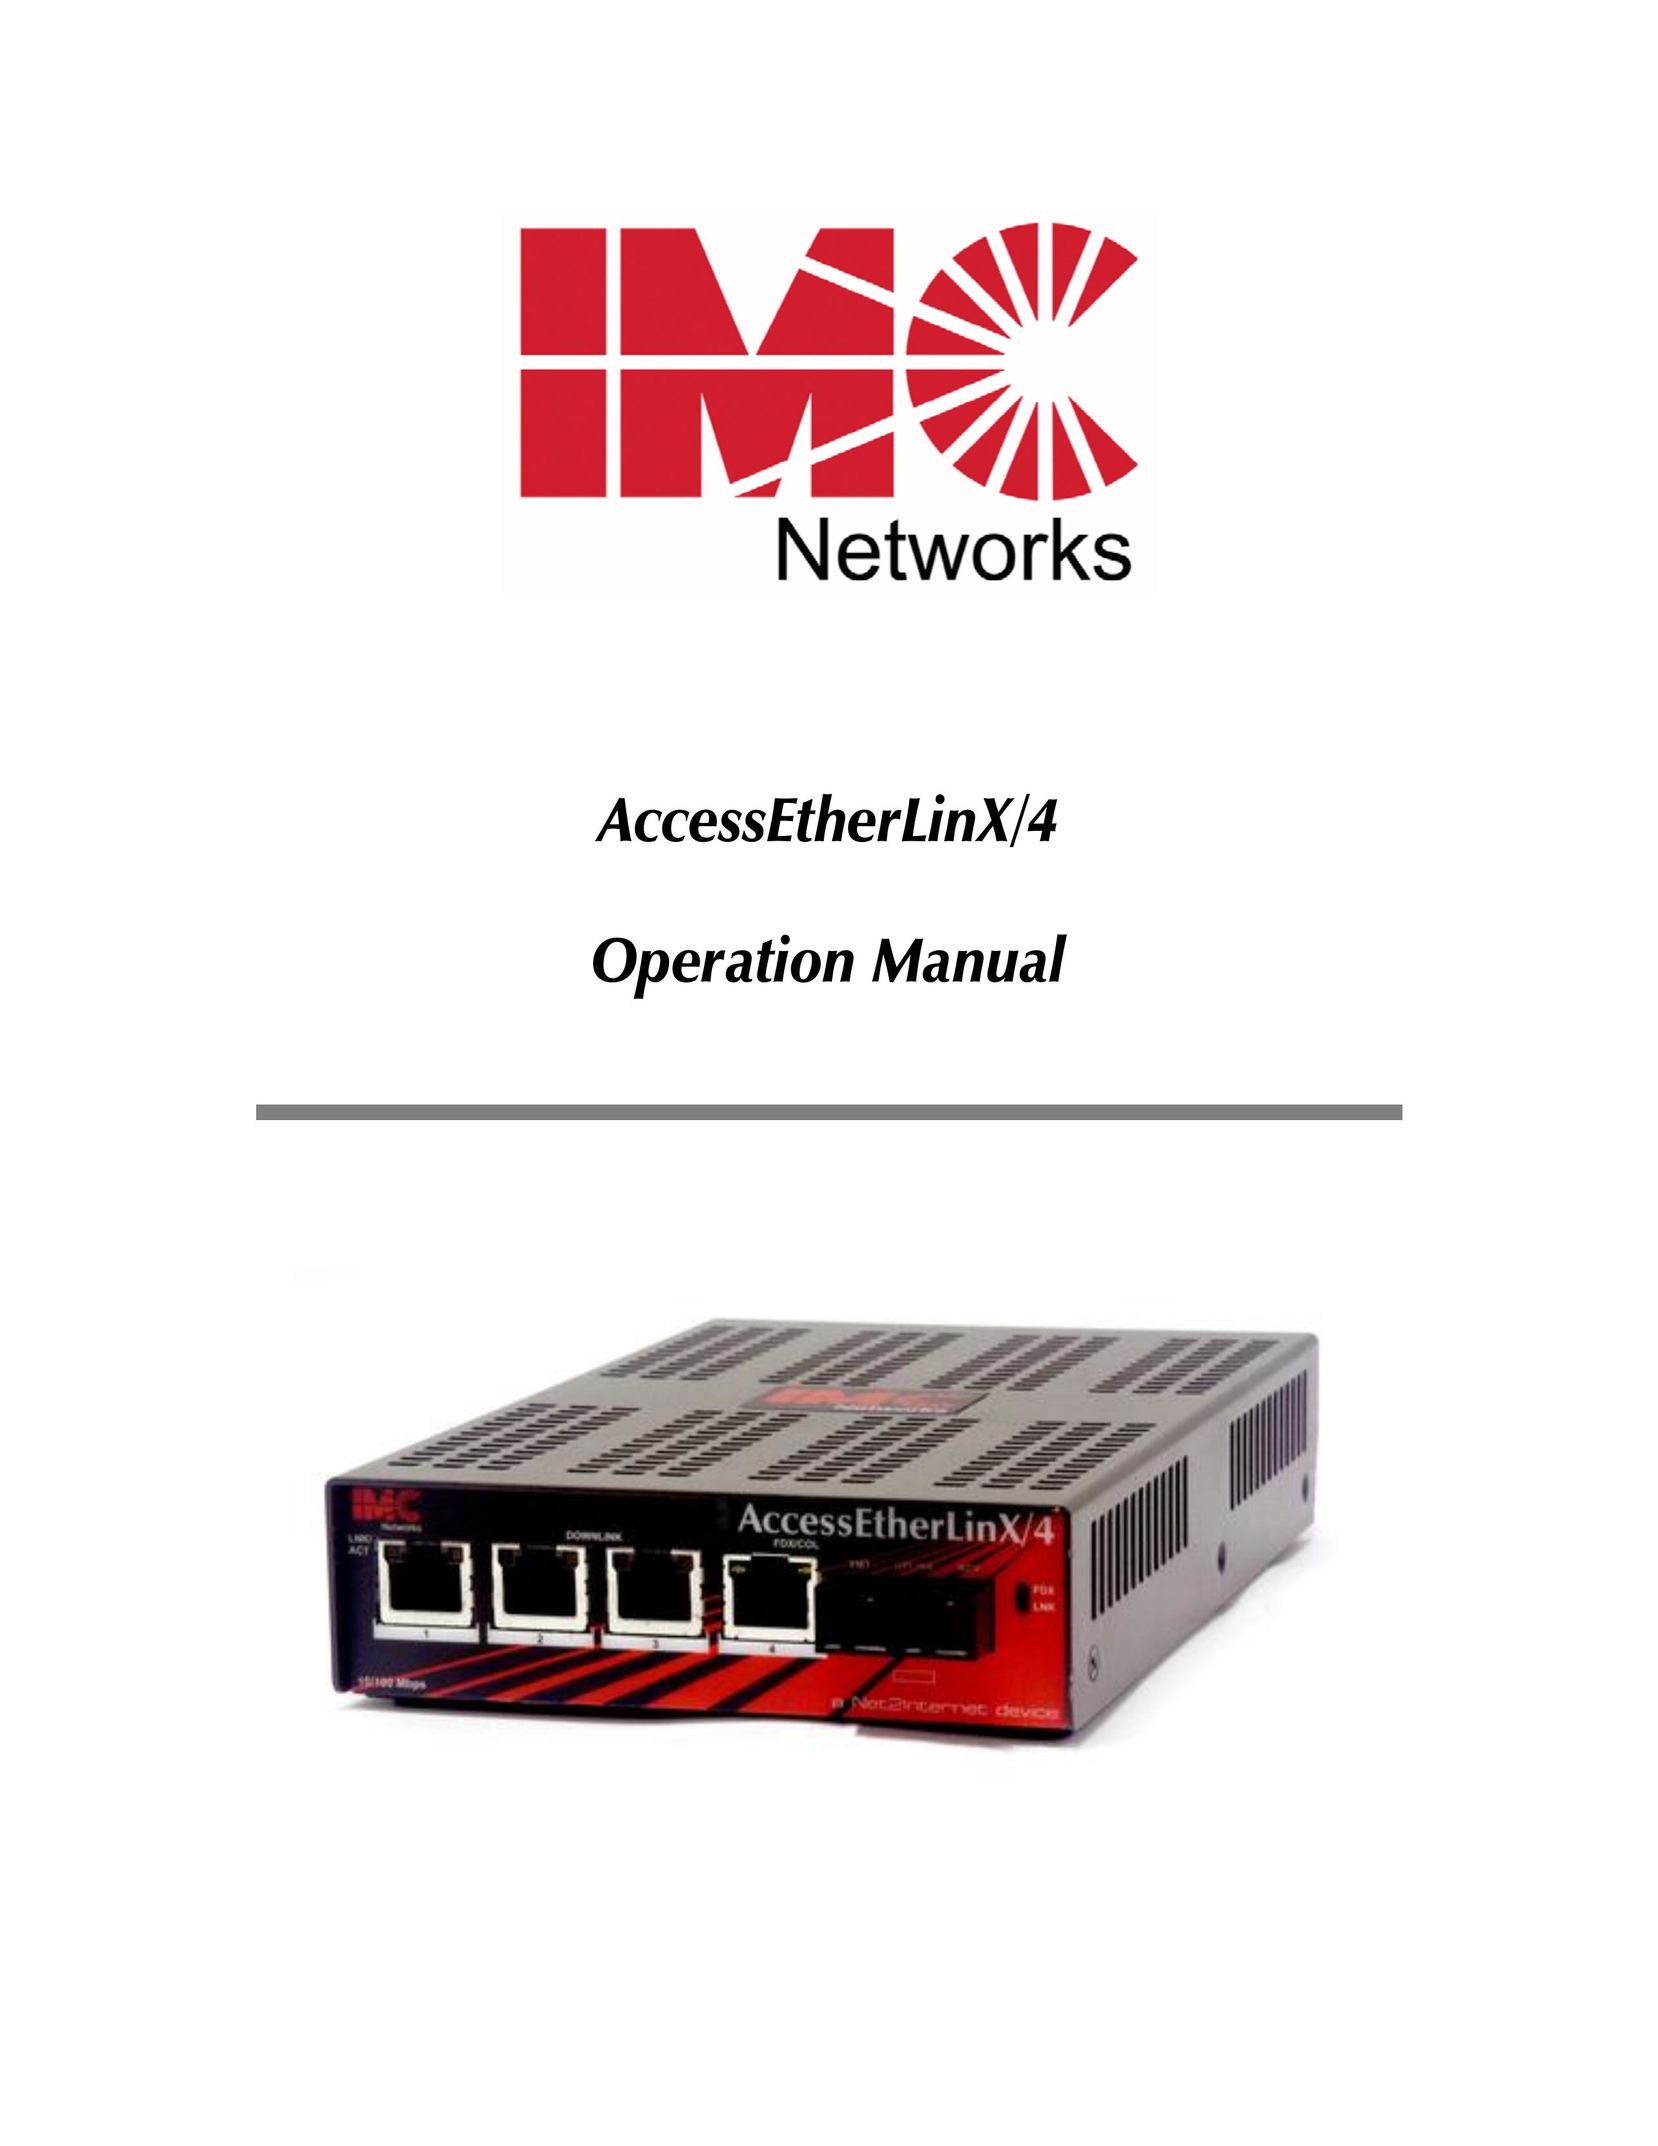 IMC Networks AccessEtherLinx/4 Switch User Manual